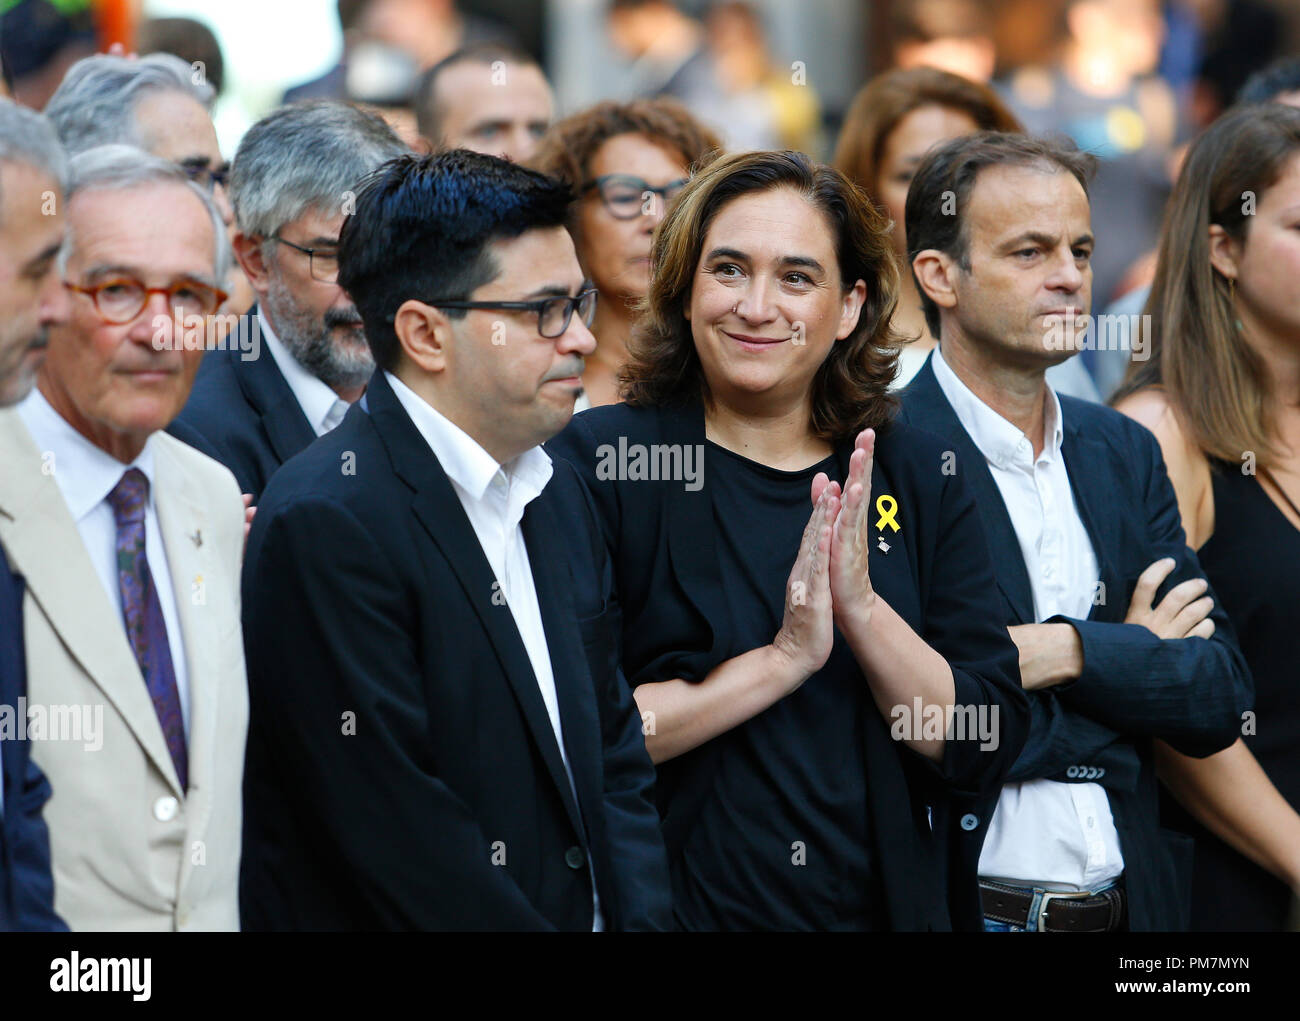 Ada Colau, Major of Barcelona gestures during the clebrations in Barcelona at their Diada, a yearly Catalan Nationalism celebration Stock Photo